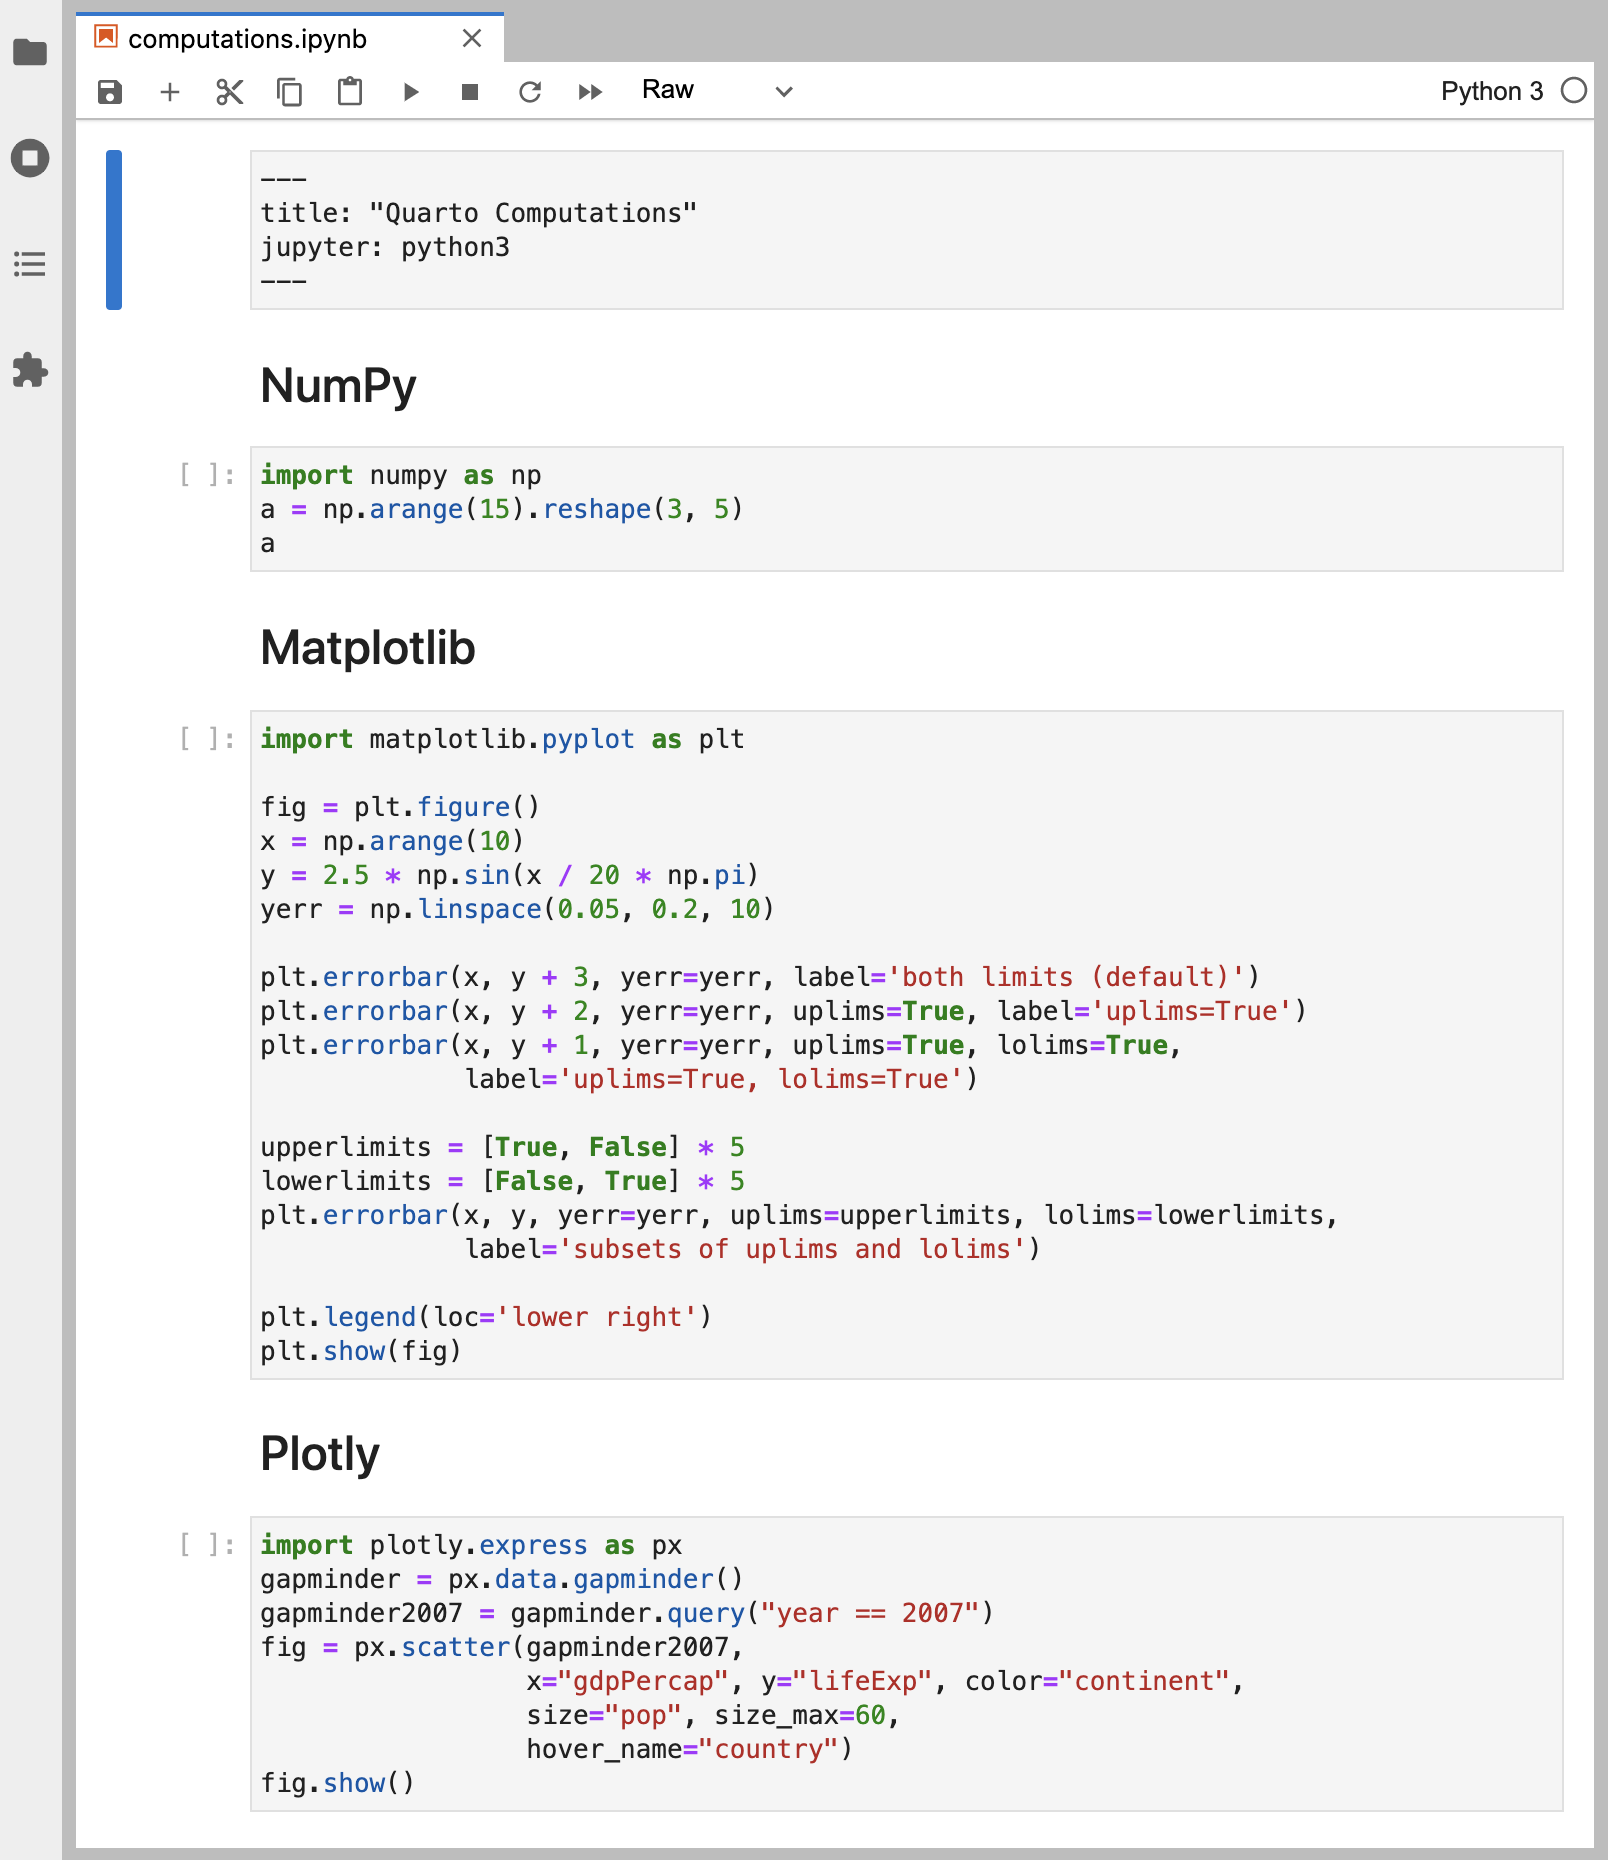 Screen shot of computations.ipynb Jupyter notebook with NumPy, Matplotlib, and Plotly code cells shown.